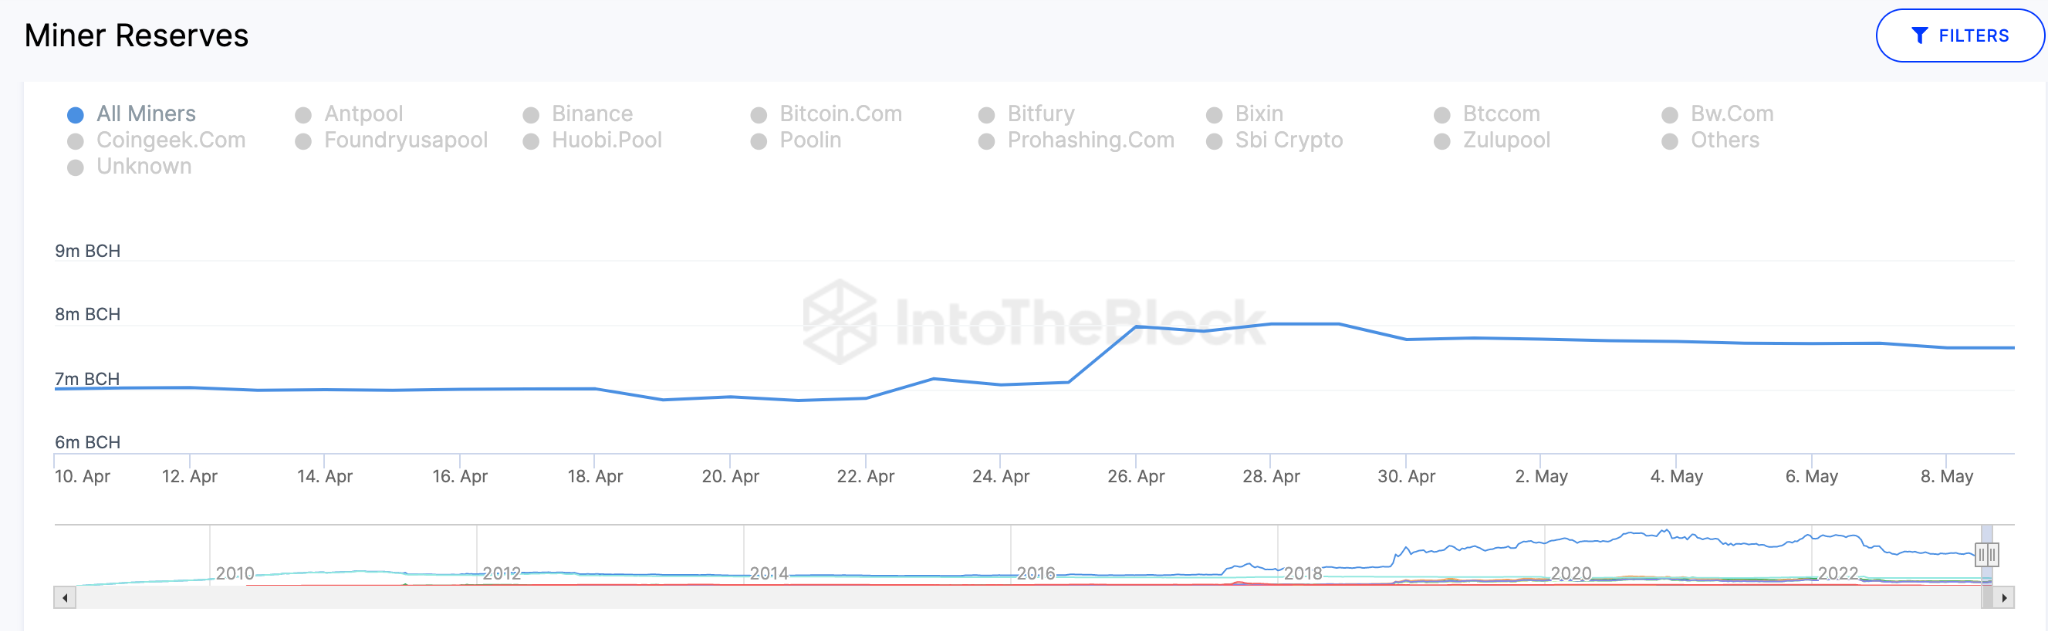 Bitcoin Cash (BCH) Price Prediction May 2023 - Miner Reserves data.